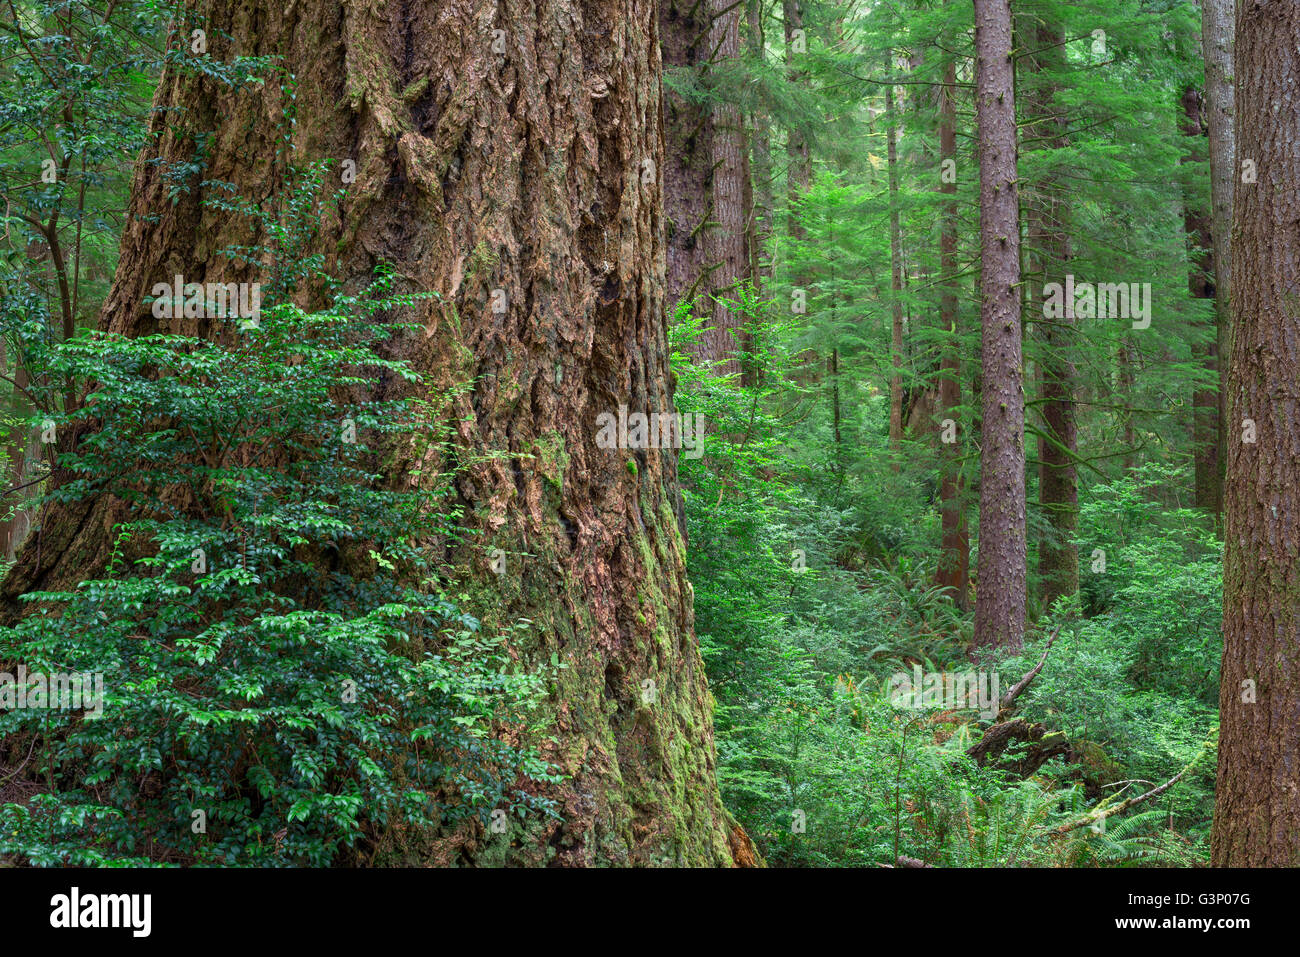 USA, Oregon, Siuslaw National Forest, Cape Perpetua Scenic Area, Huge trunk of Douglas fir and smaller Sitka spruce in forest. Stock Photo